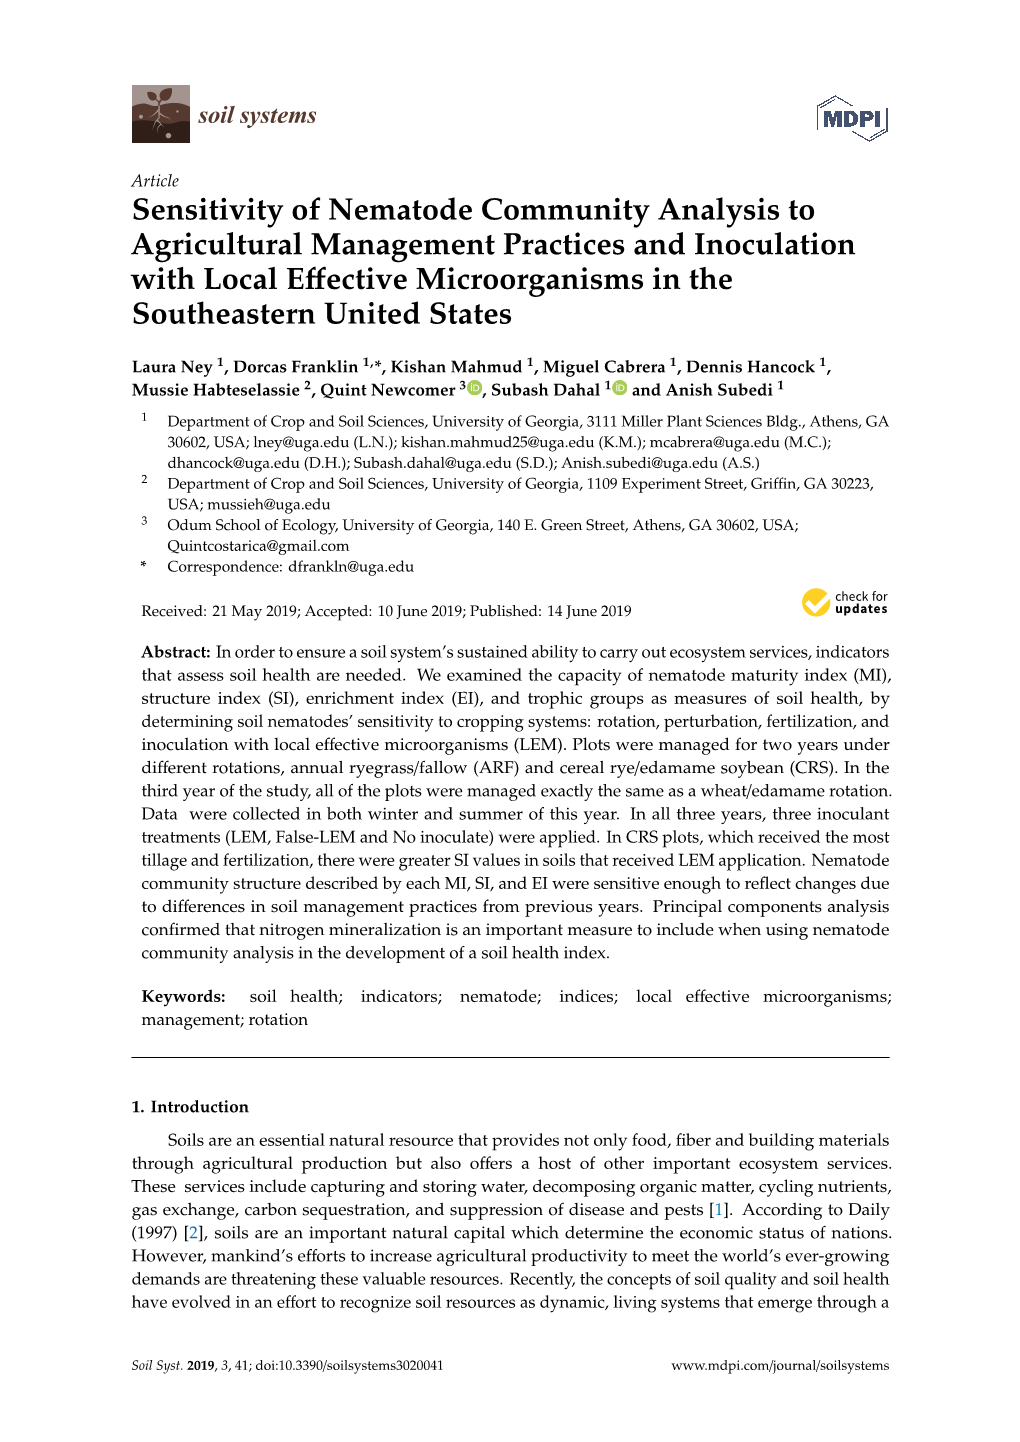 Sensitivity of Nematode Community Analysis to Agricultural Management Practices and Inoculation with Local Eﬀective Microorganisms in the Southeastern United States